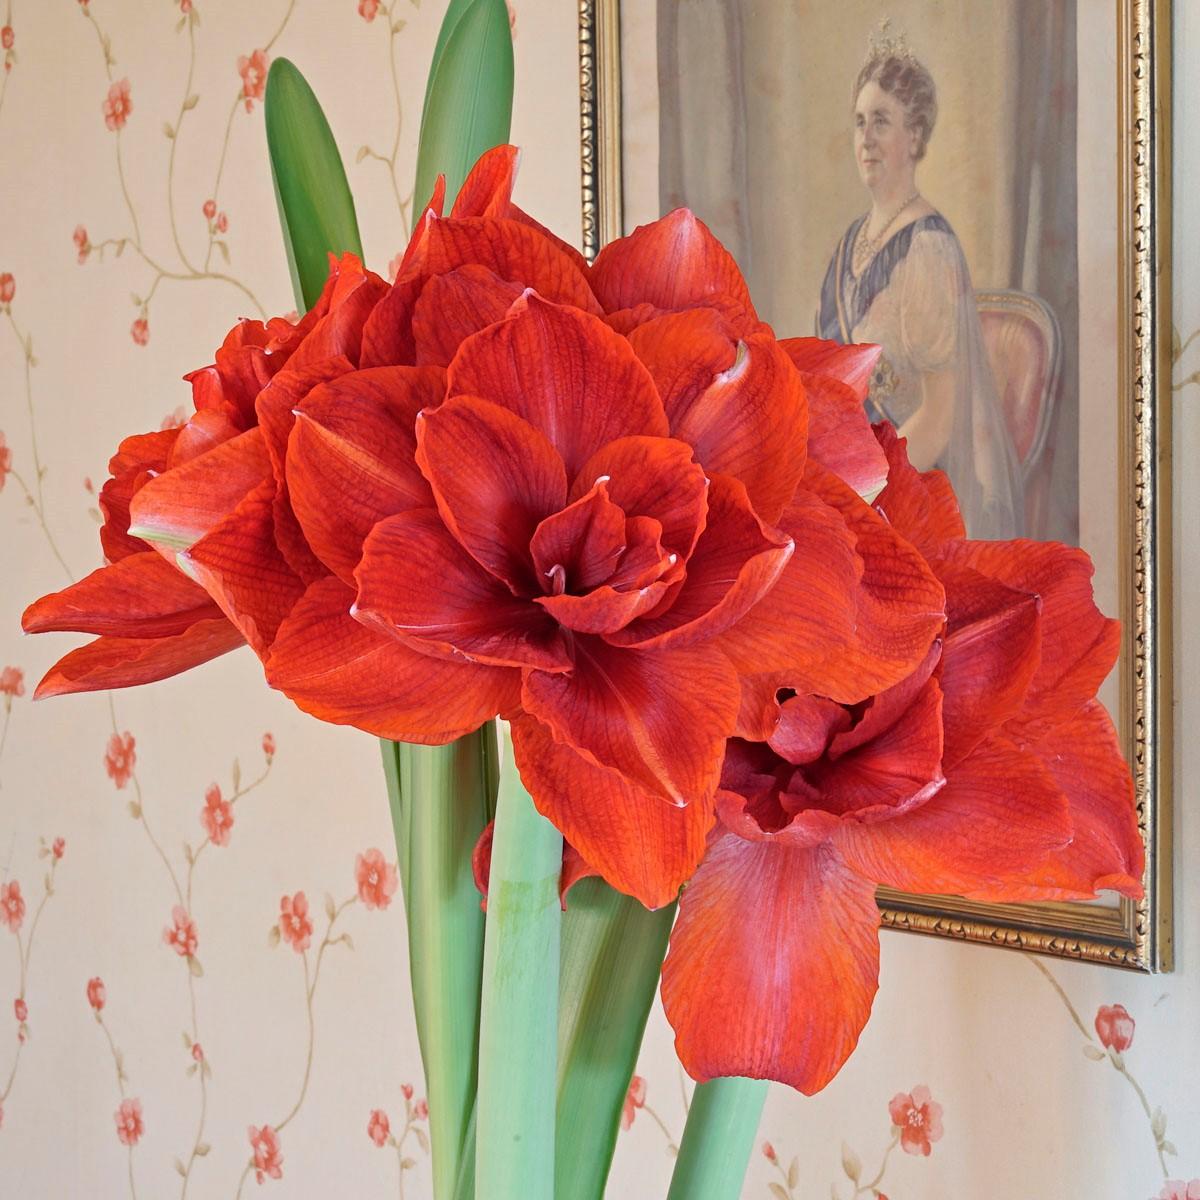 Amaryllis, the Queen of the Winter in our assortment of flower bulbs